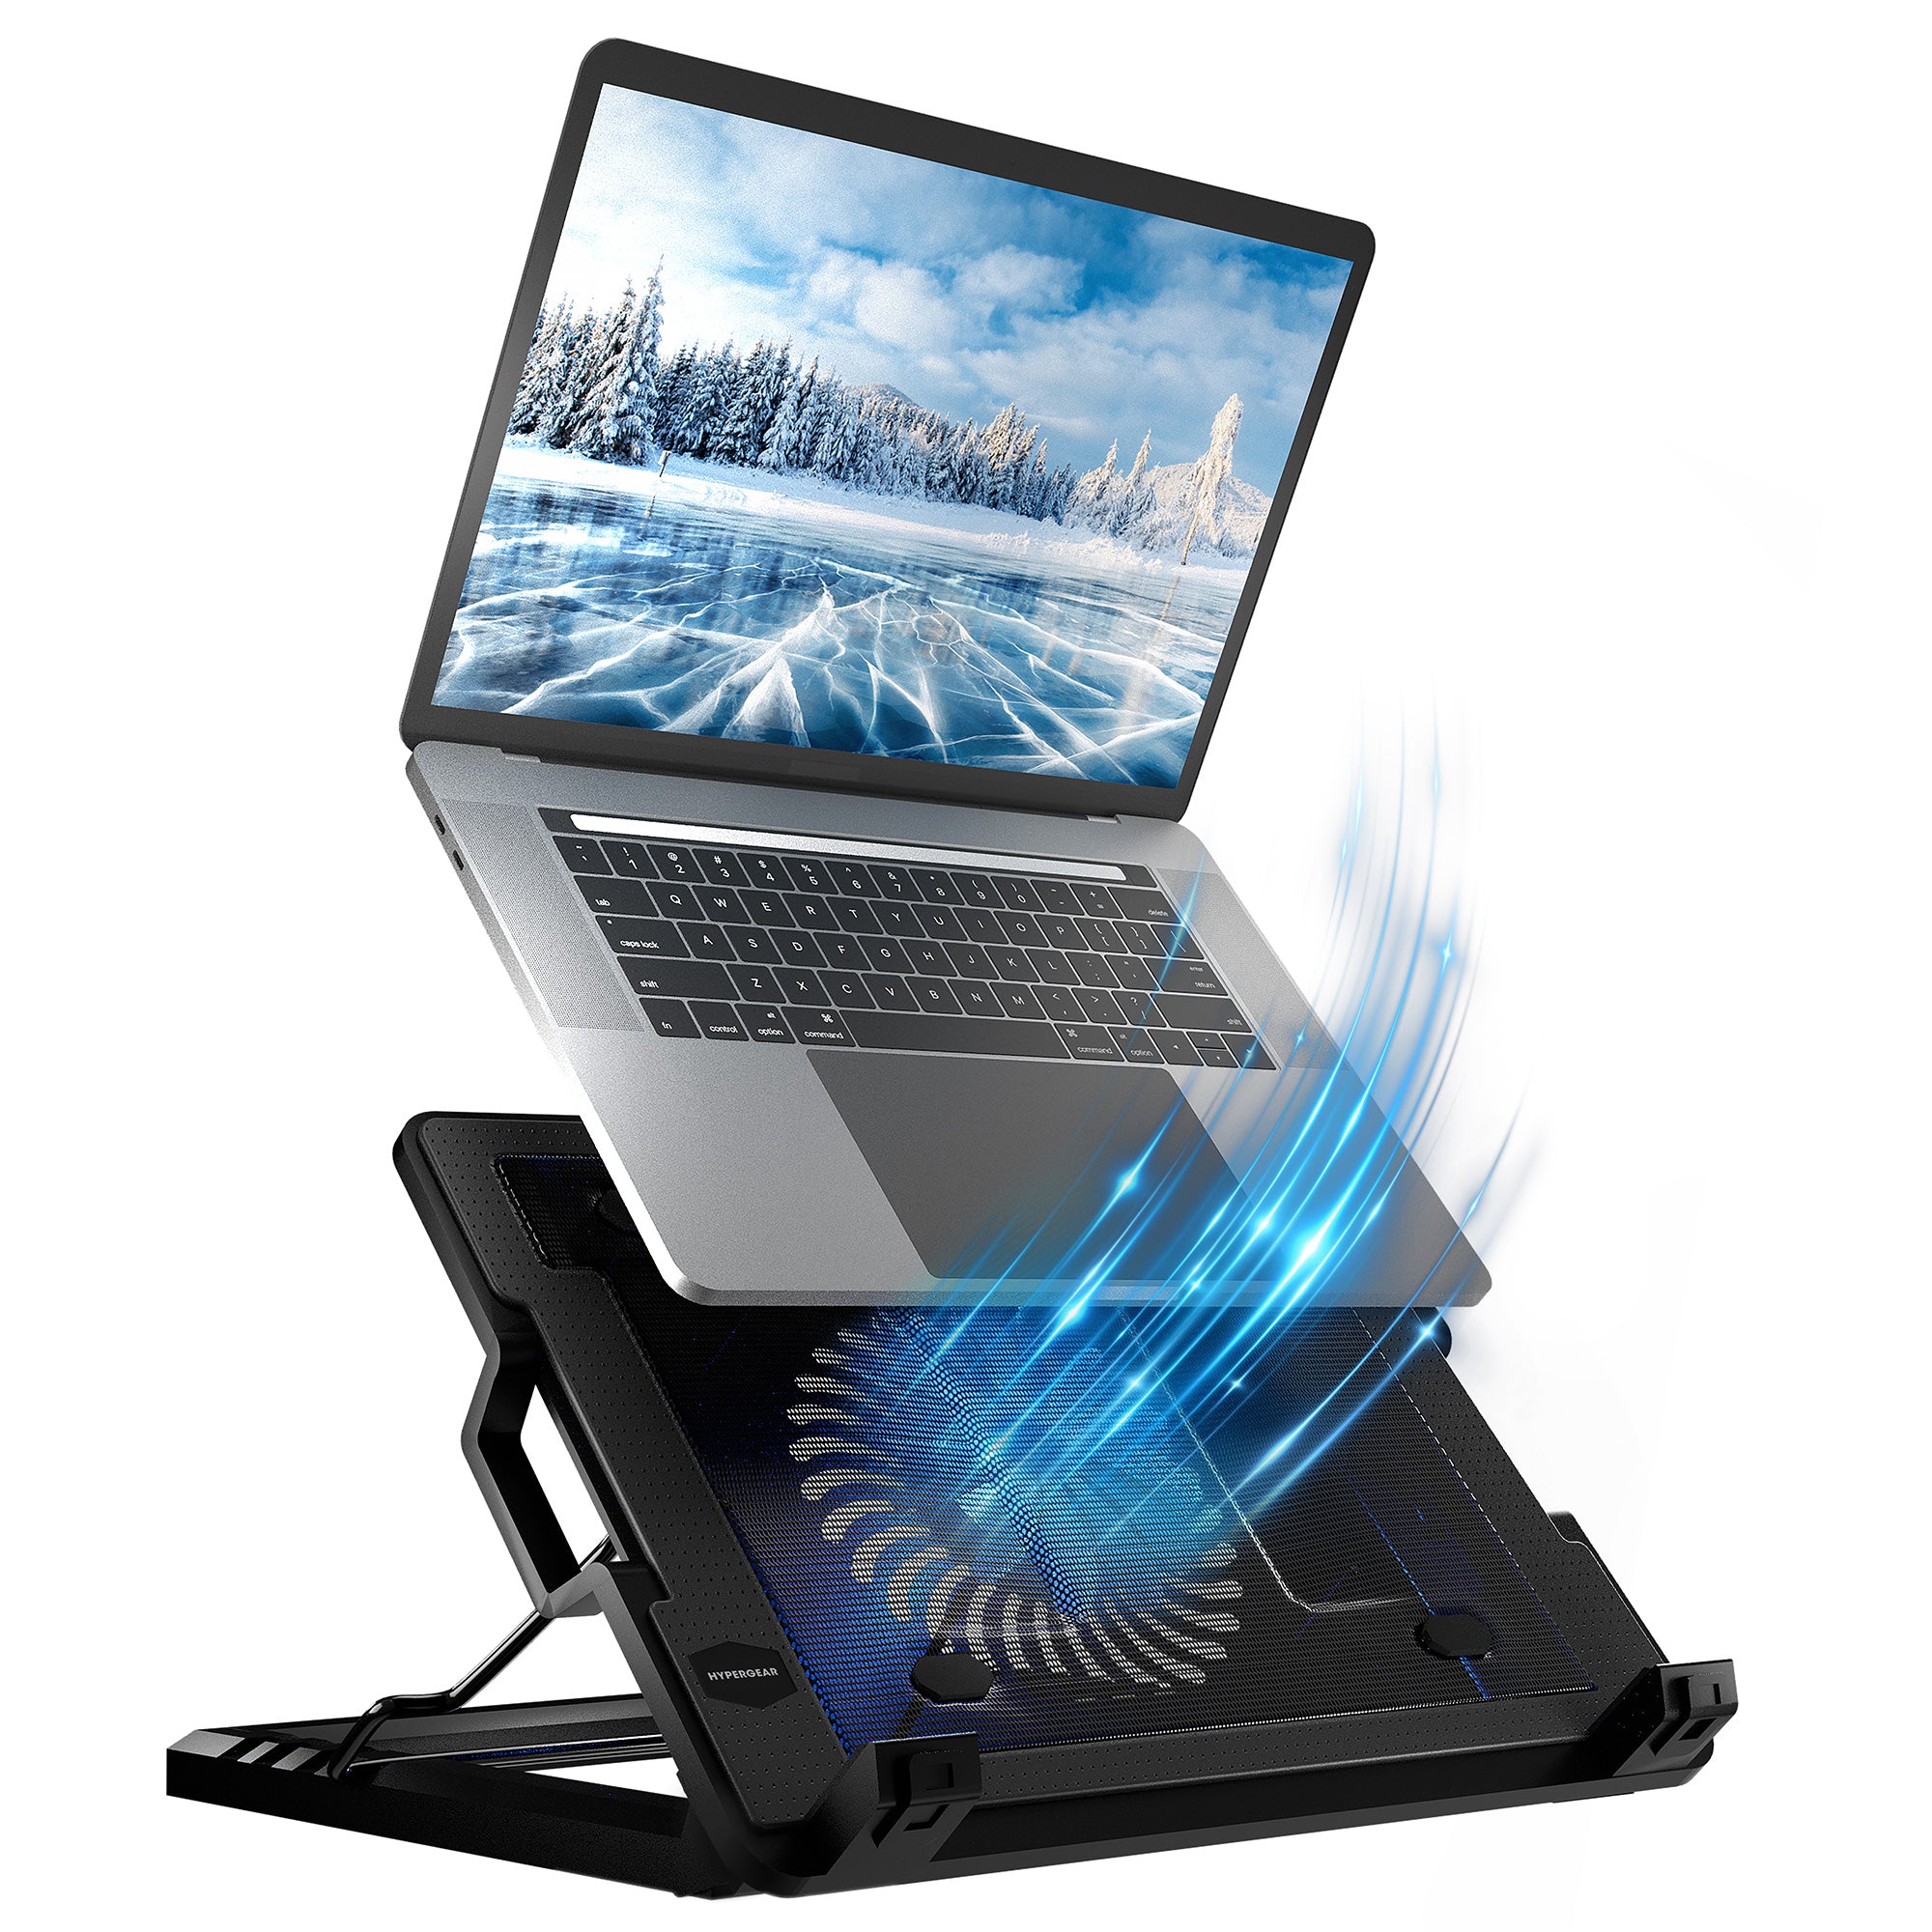 HyperGear UpRite Air Portable Laptop Cooling Stand Black